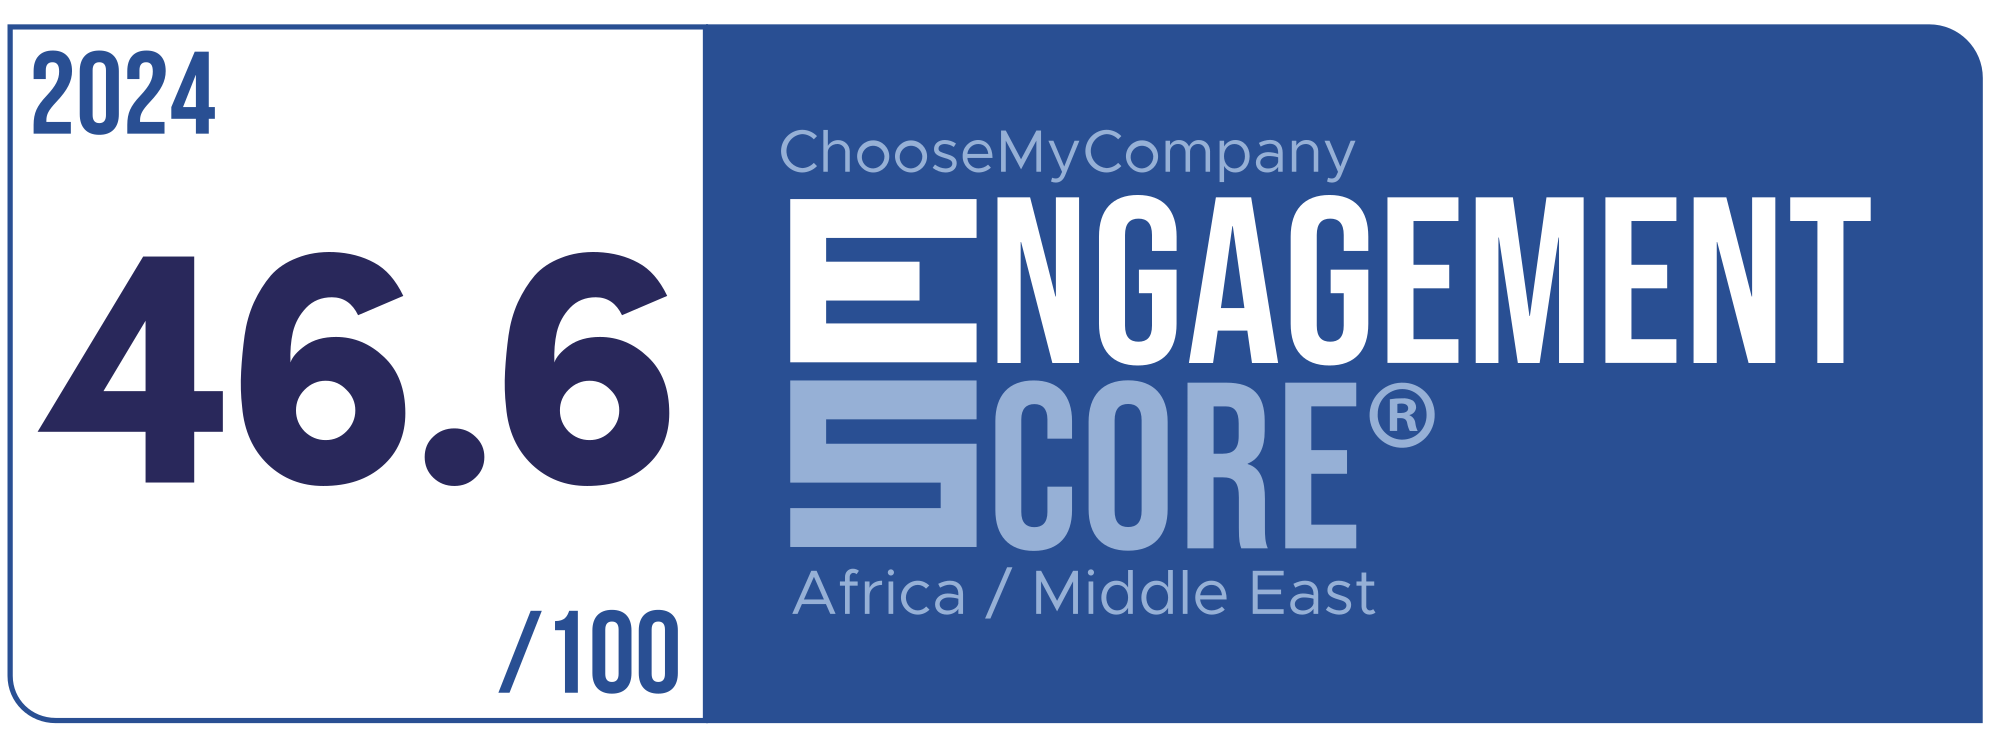 Label Engagement Score 2024 Africa / Middle East